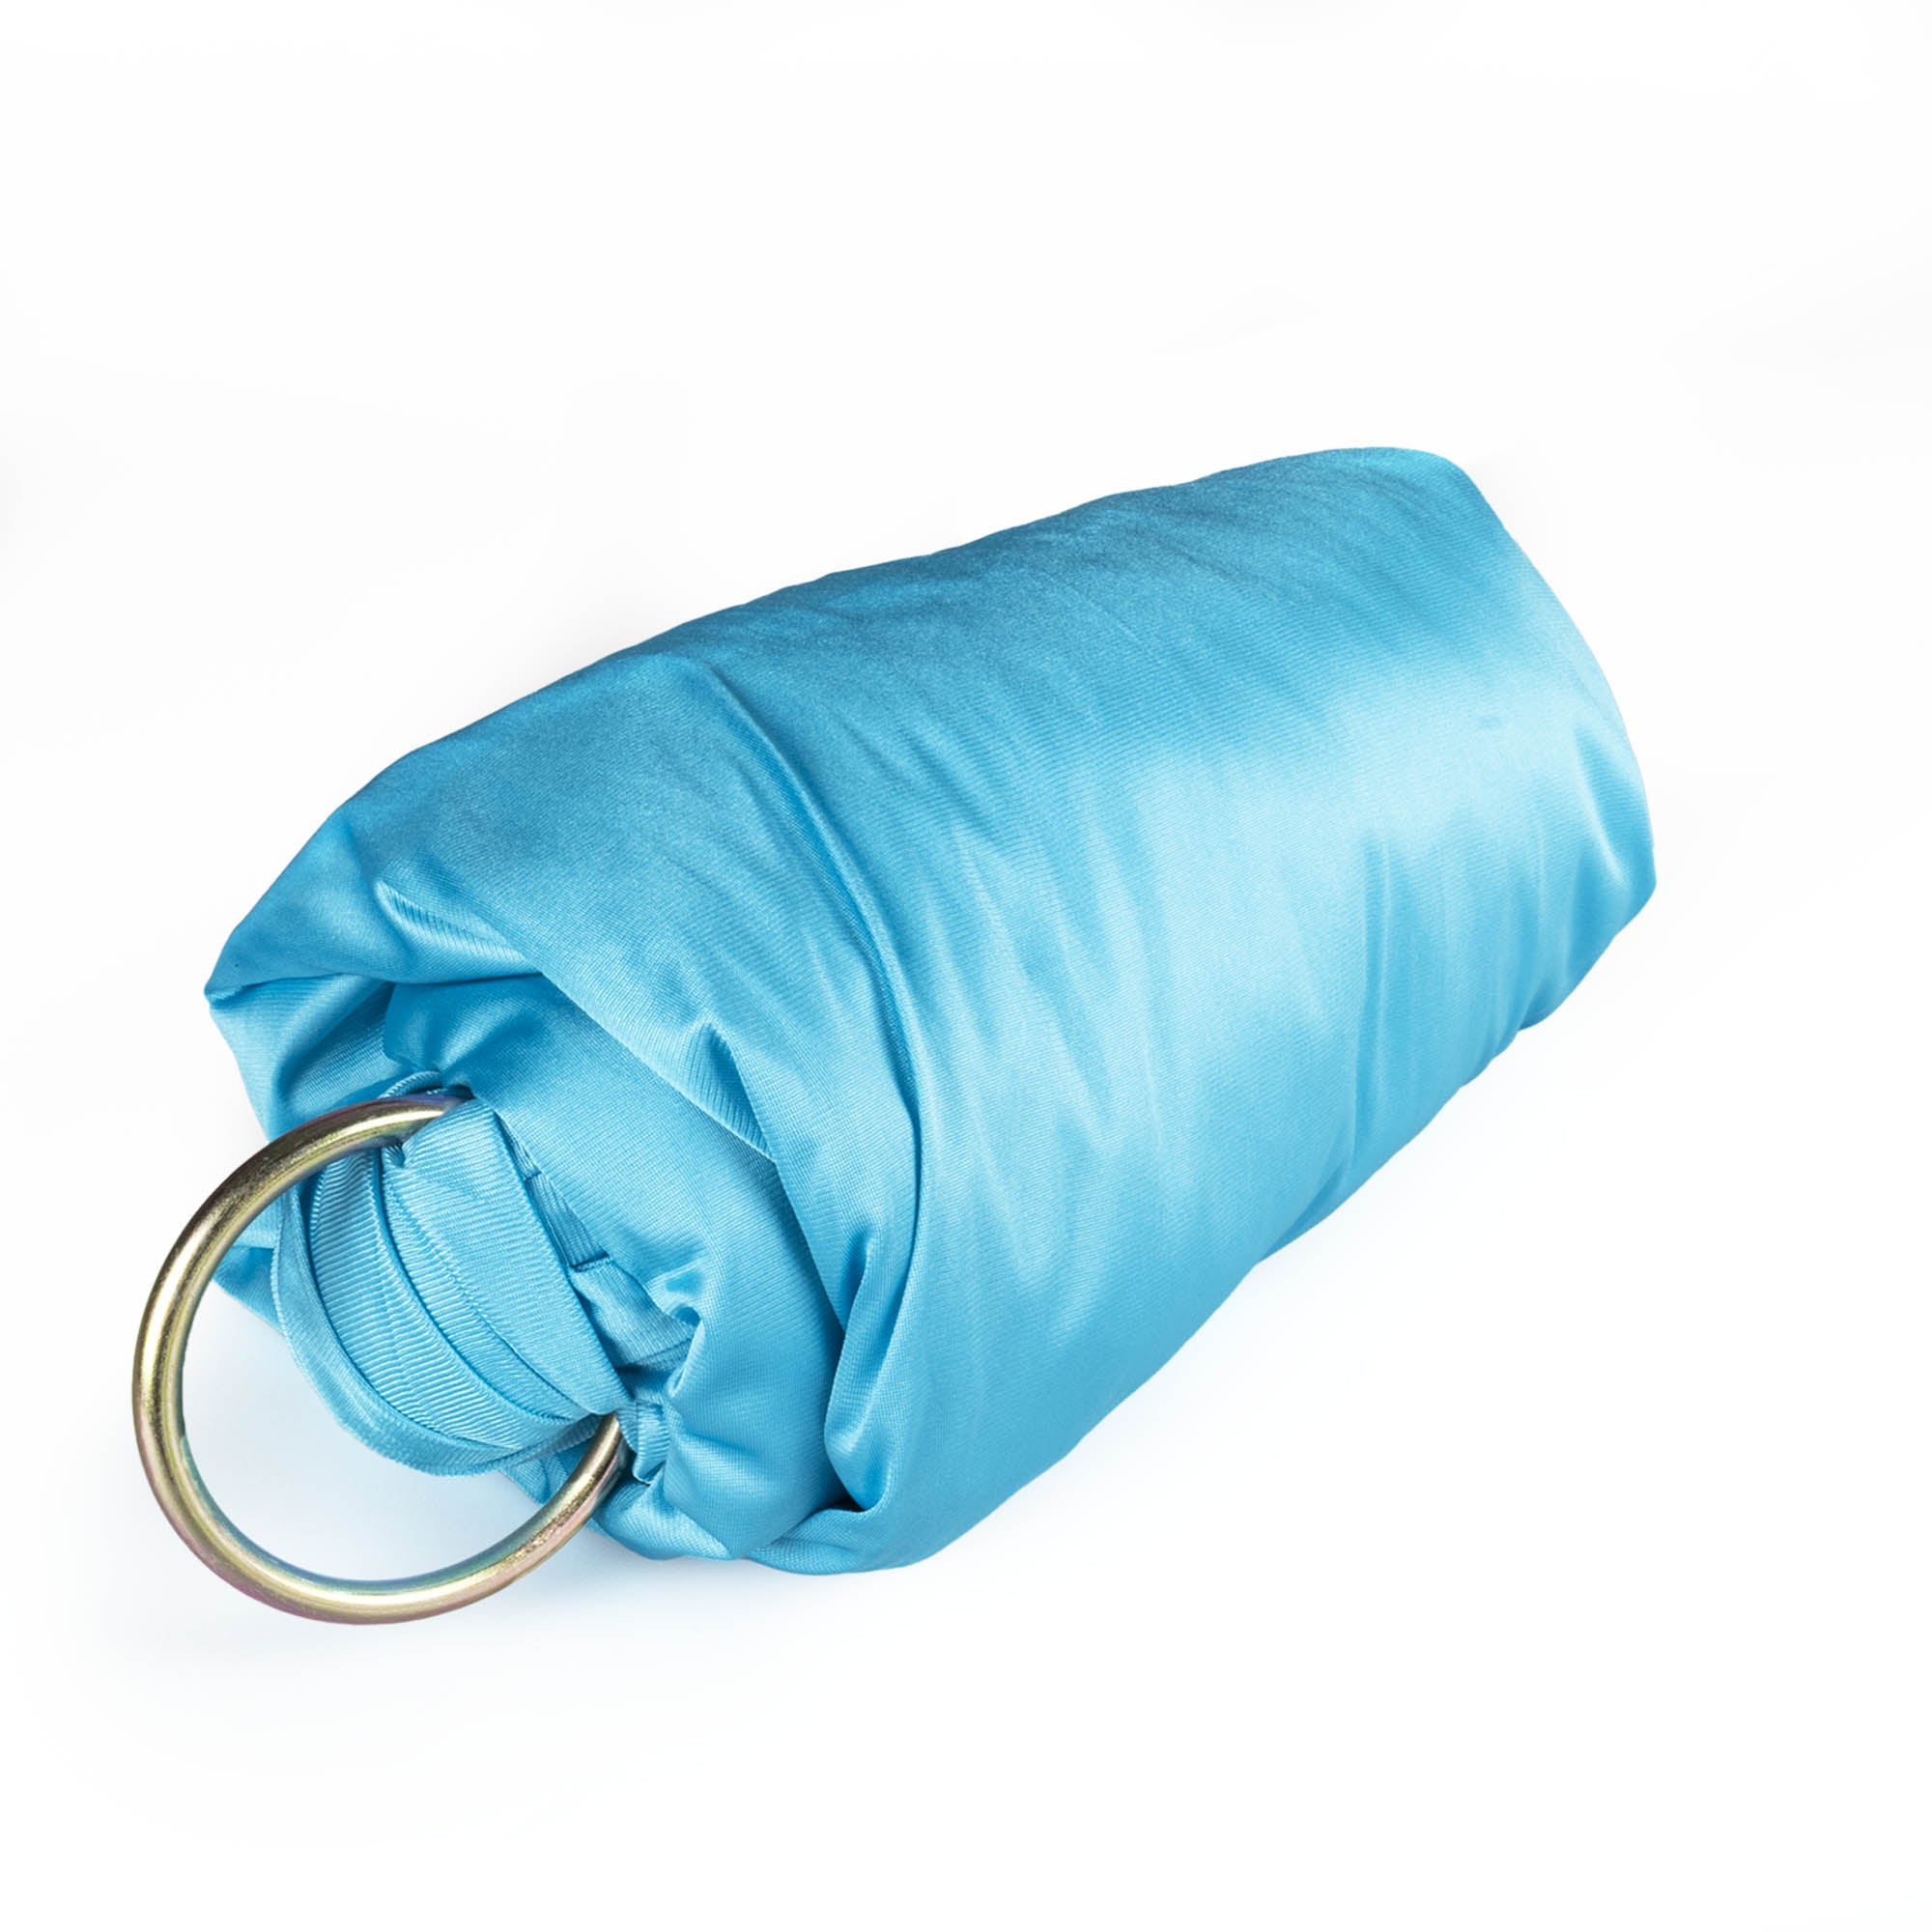 Turquoise yoga hammock rolled up with ring attached